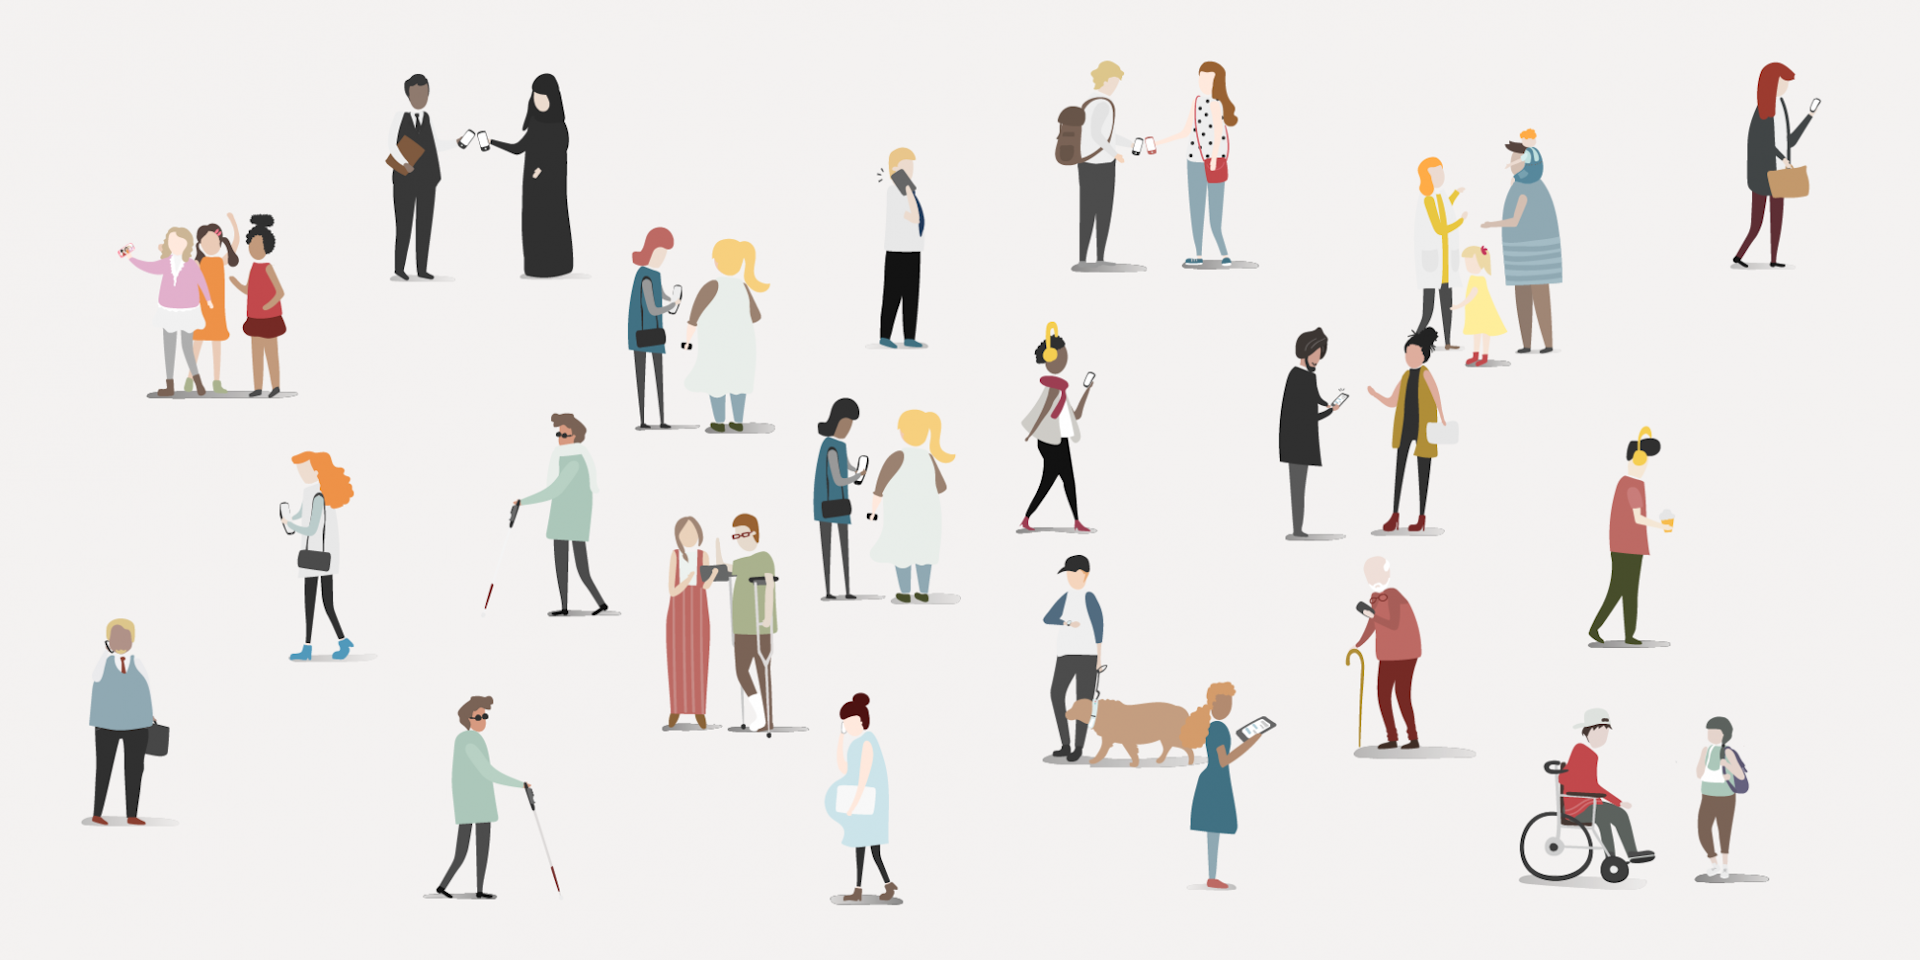 Illustration of a large crowd of people of all ages including people in wheelchairs, pregnant people and people walking dogs, many are together and talking in groups